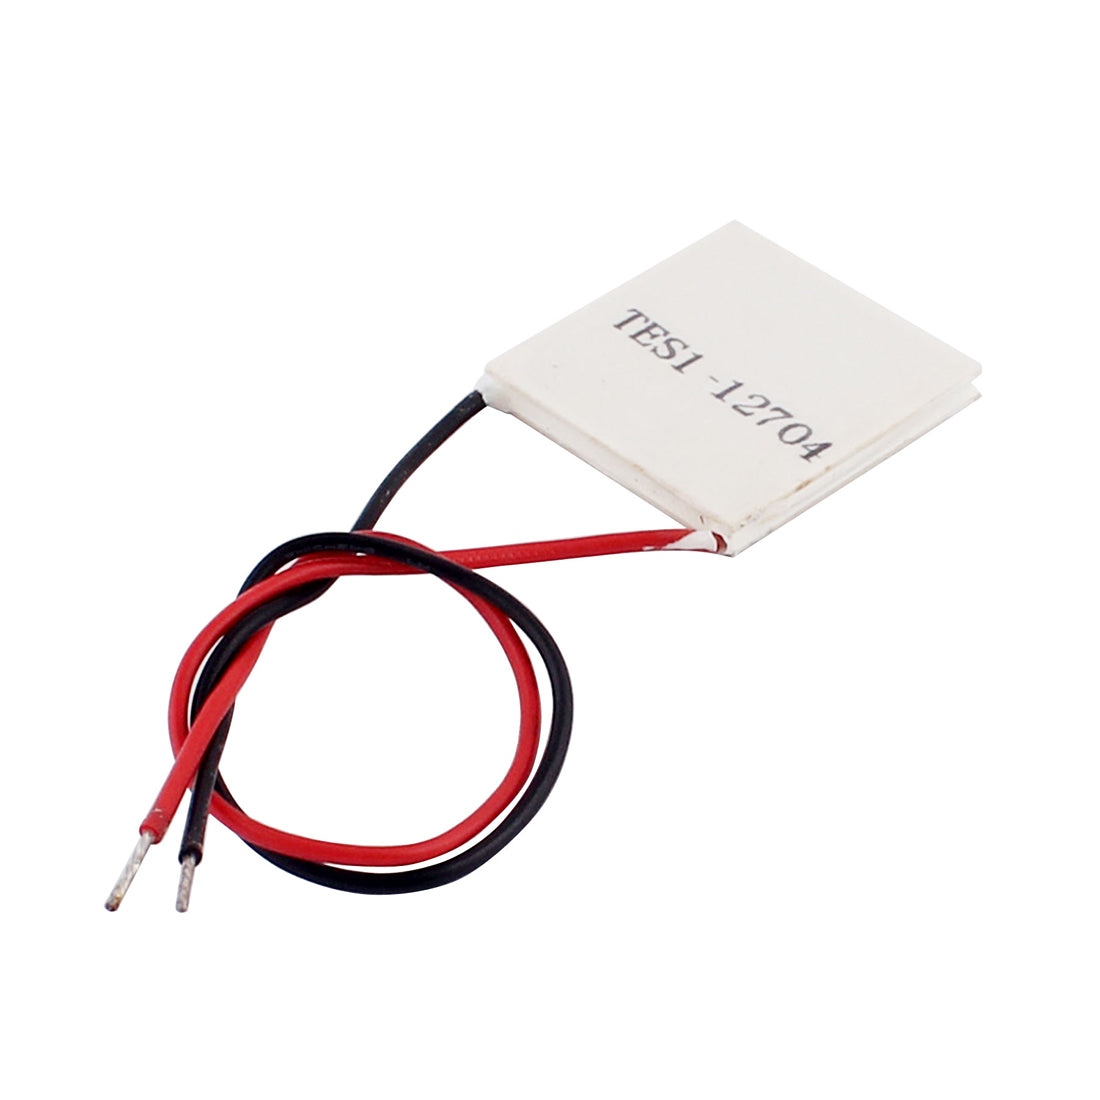 uxcell Uxcell TES1-12704 2A 12V 24W 30x30x3.5mm Thermoelectric Cooler Peltier Plate Module